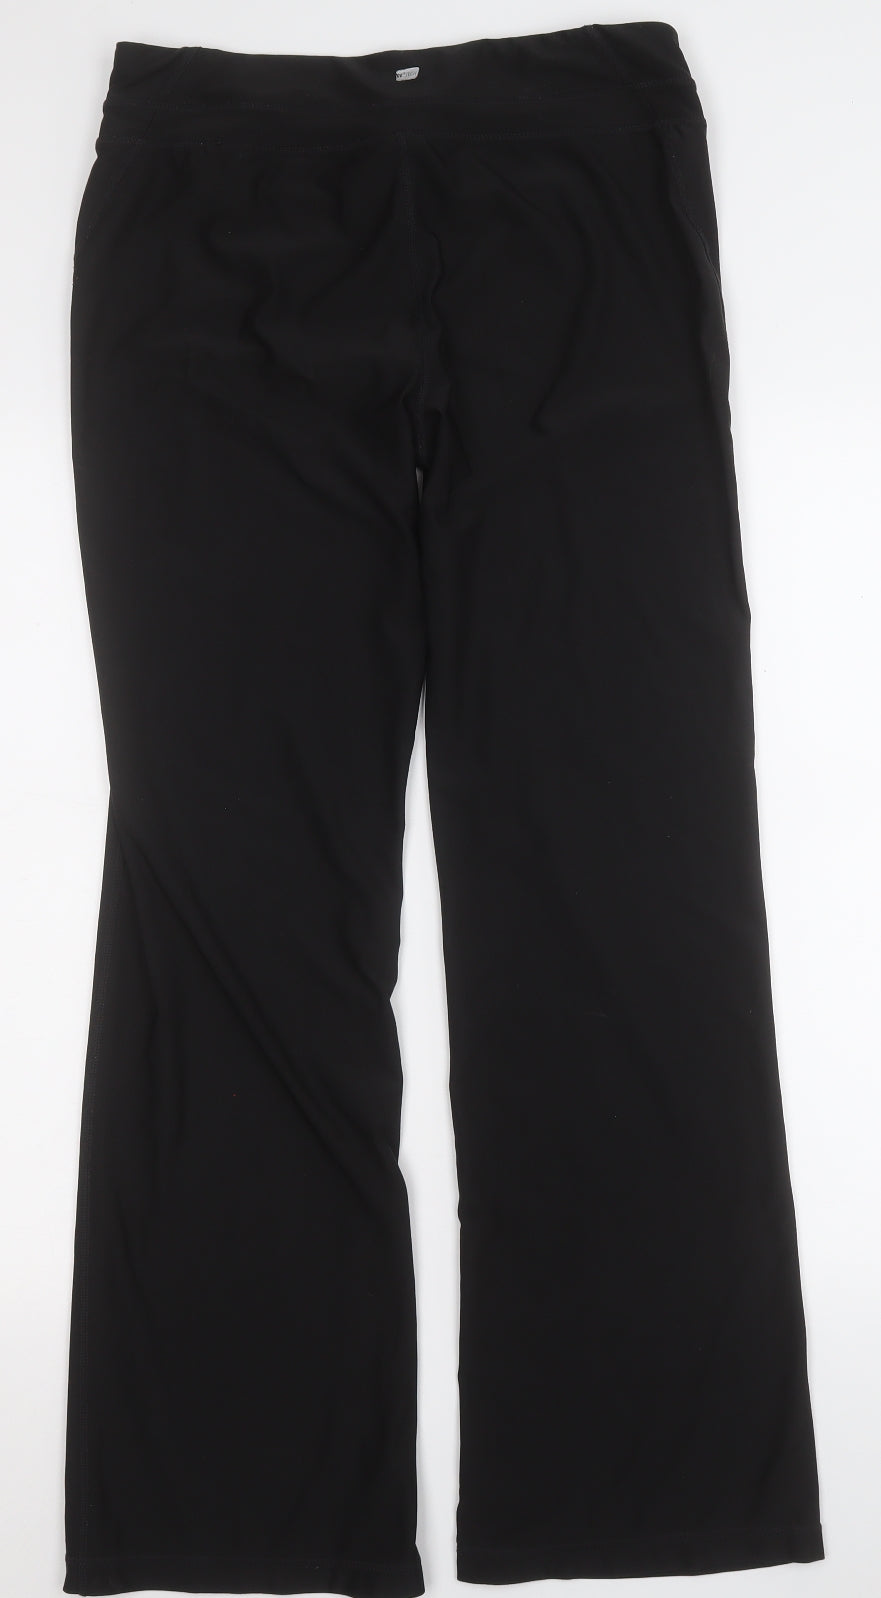 Athletic Works Womens Black Polyester Jogger Trousers Size M L30